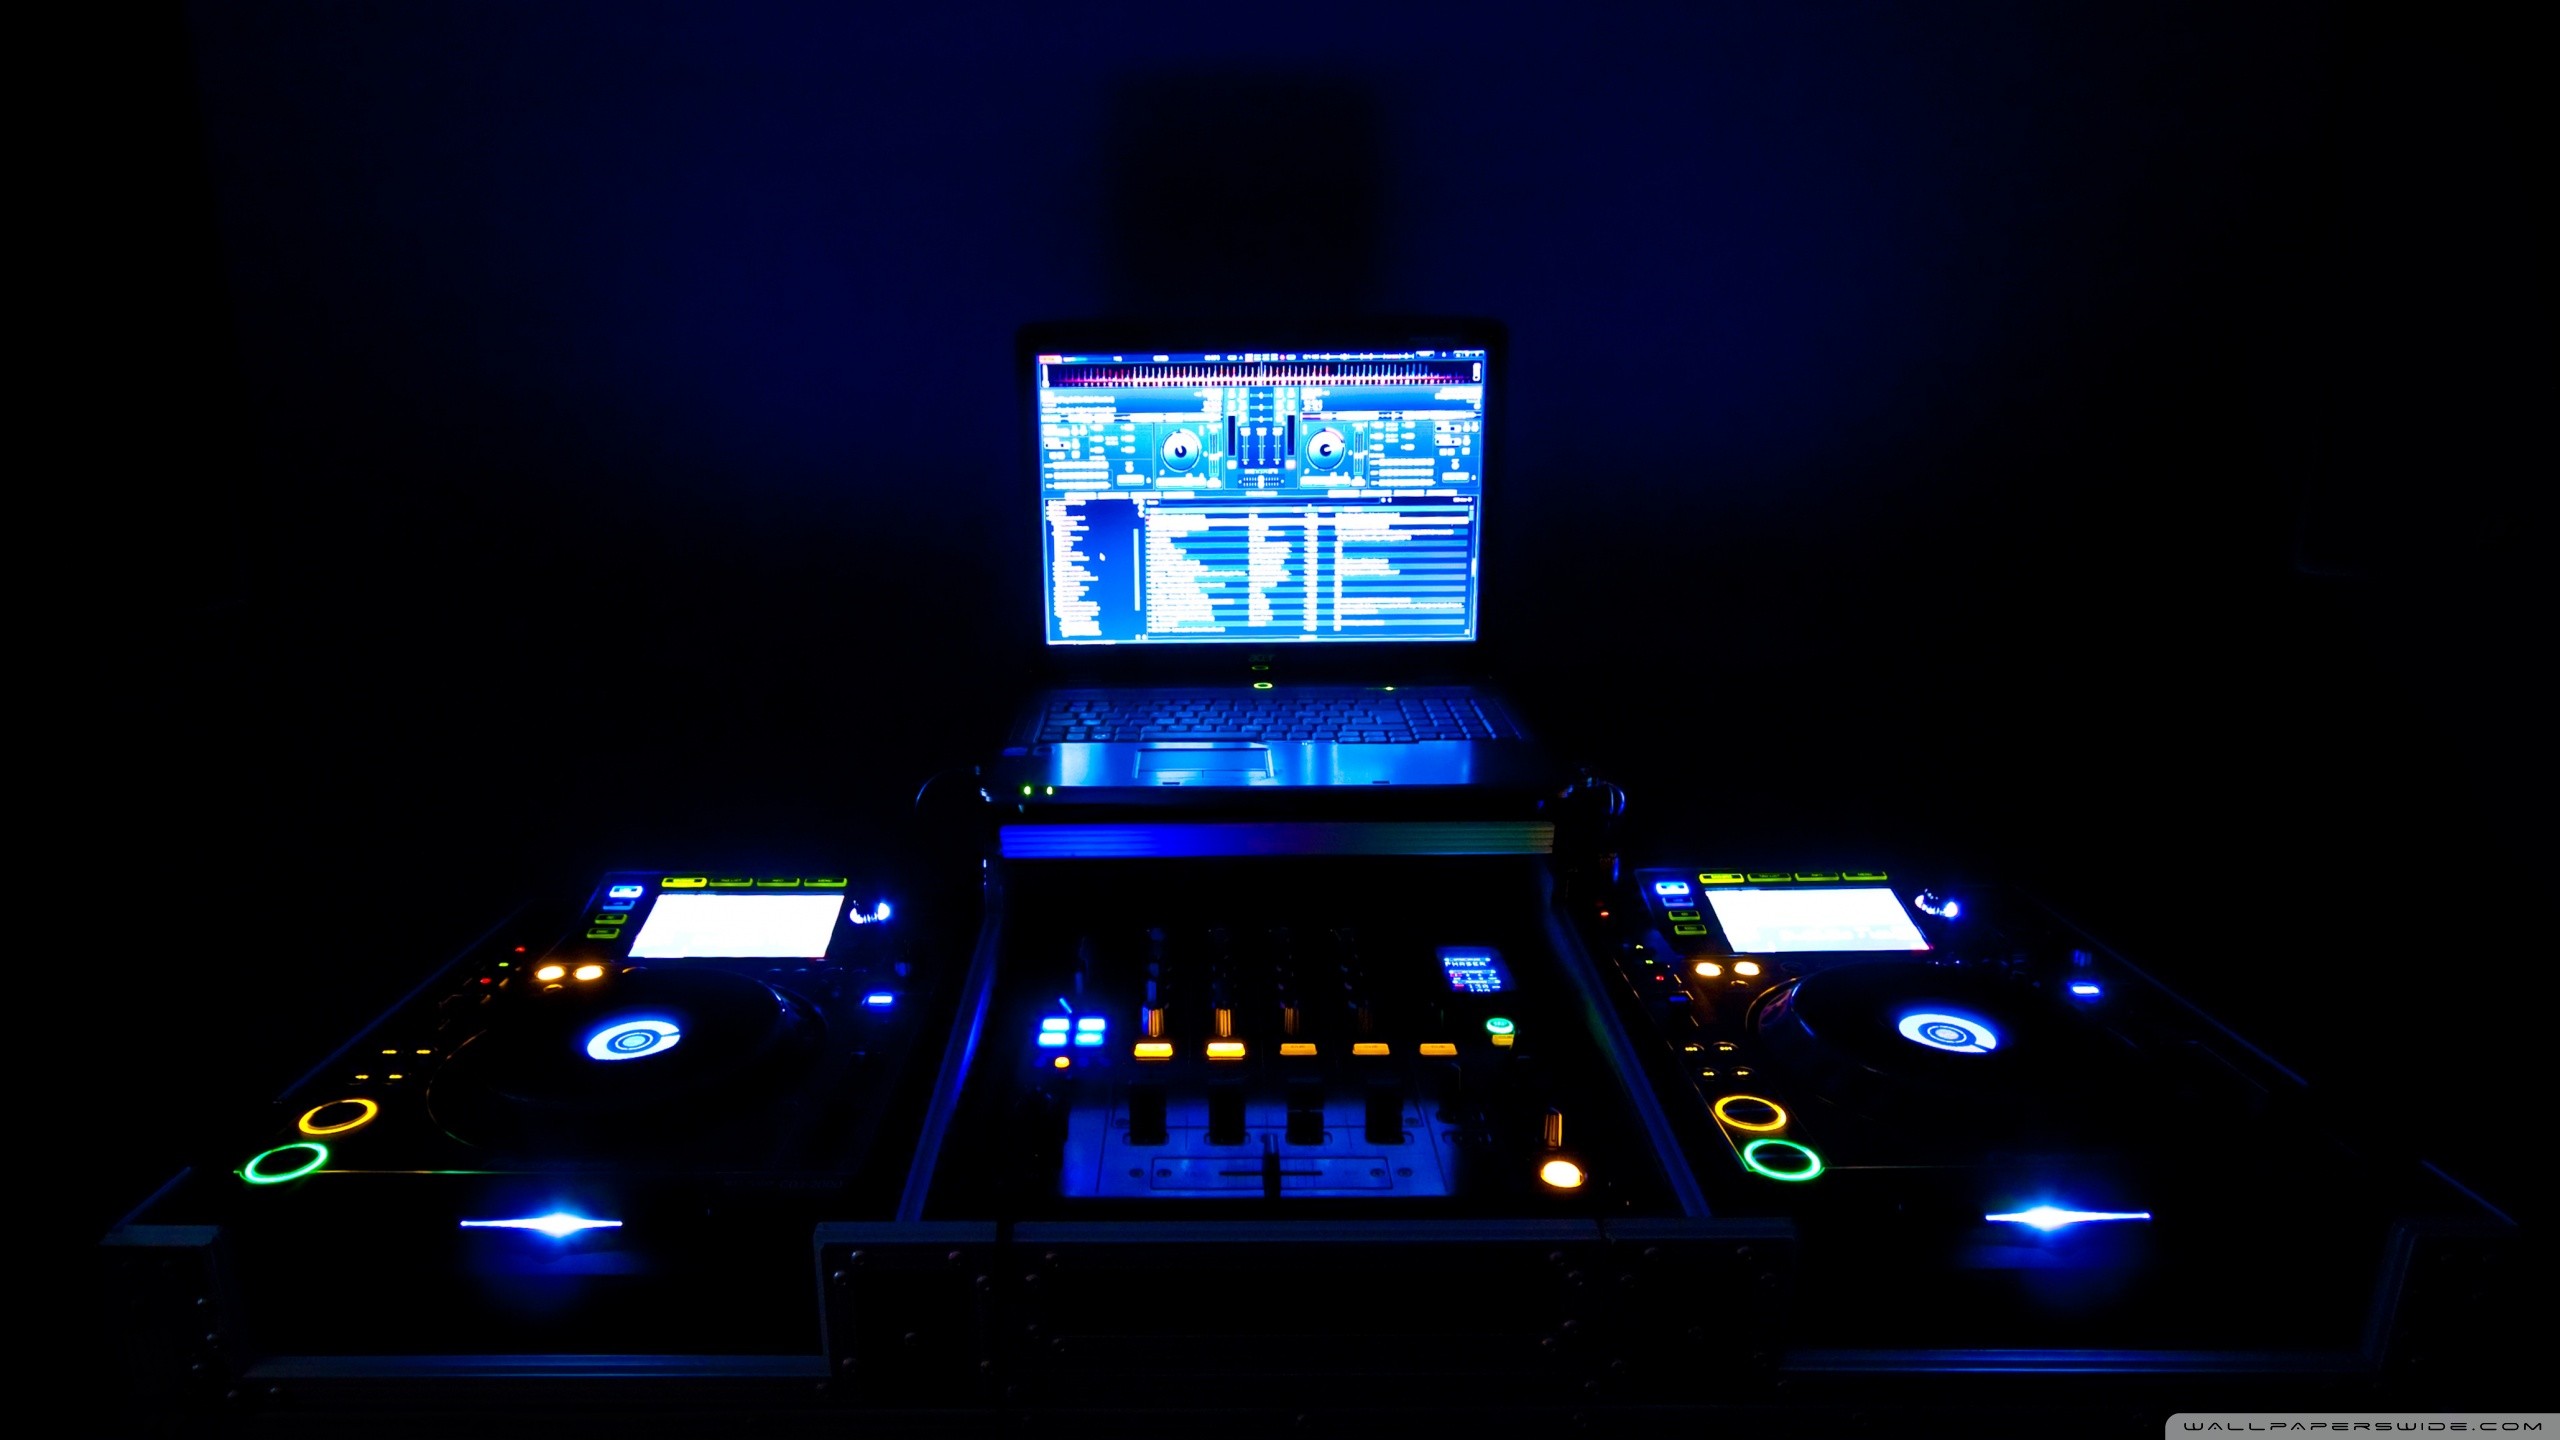 General 2560x1440 electronics mixing consoles dark technology audio-technica watermarked low light